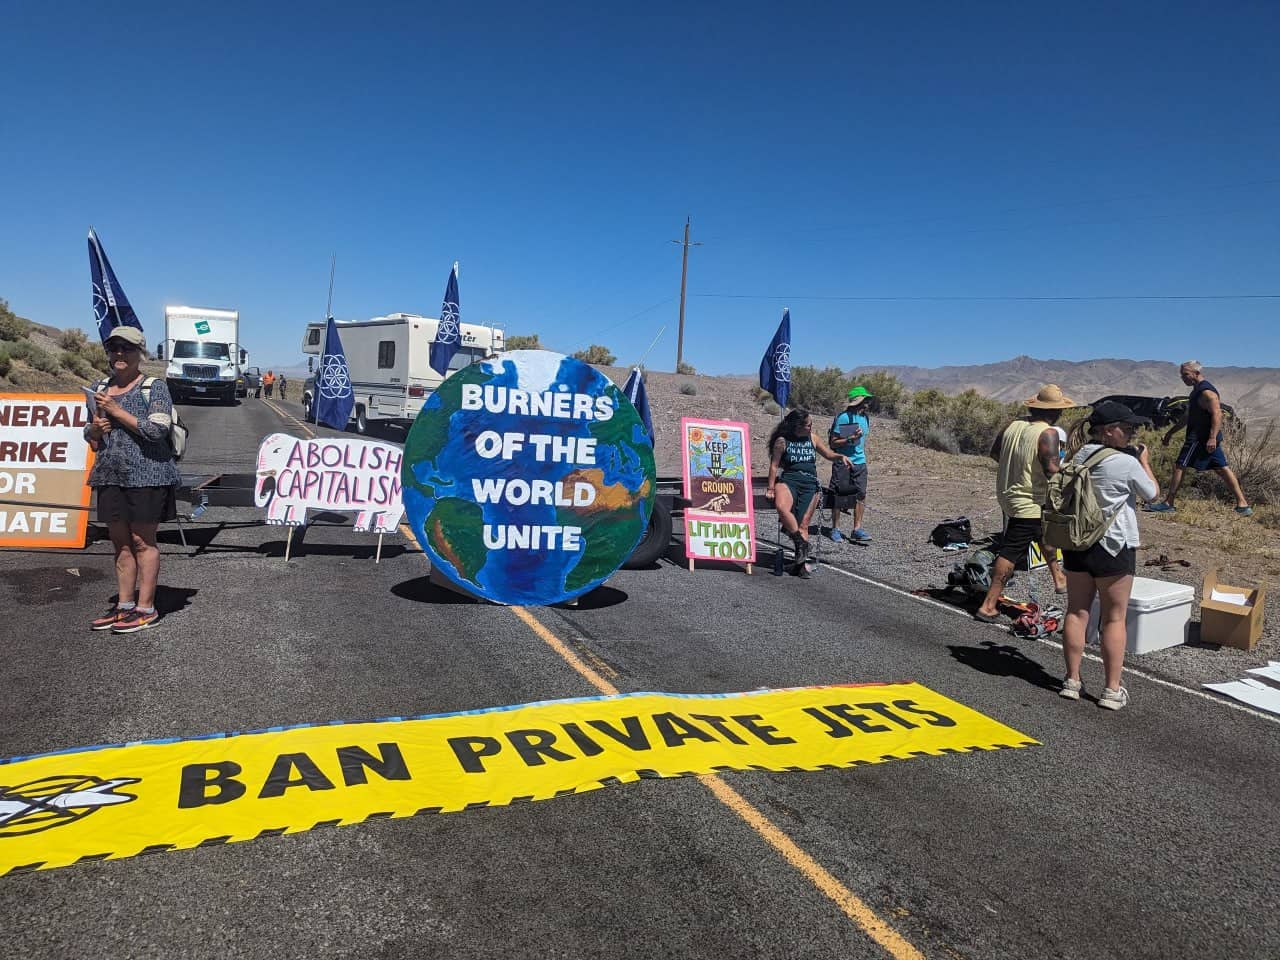 Rebels set up a barricade across the road to Burning man, including a banner demanding a ban on private jets 